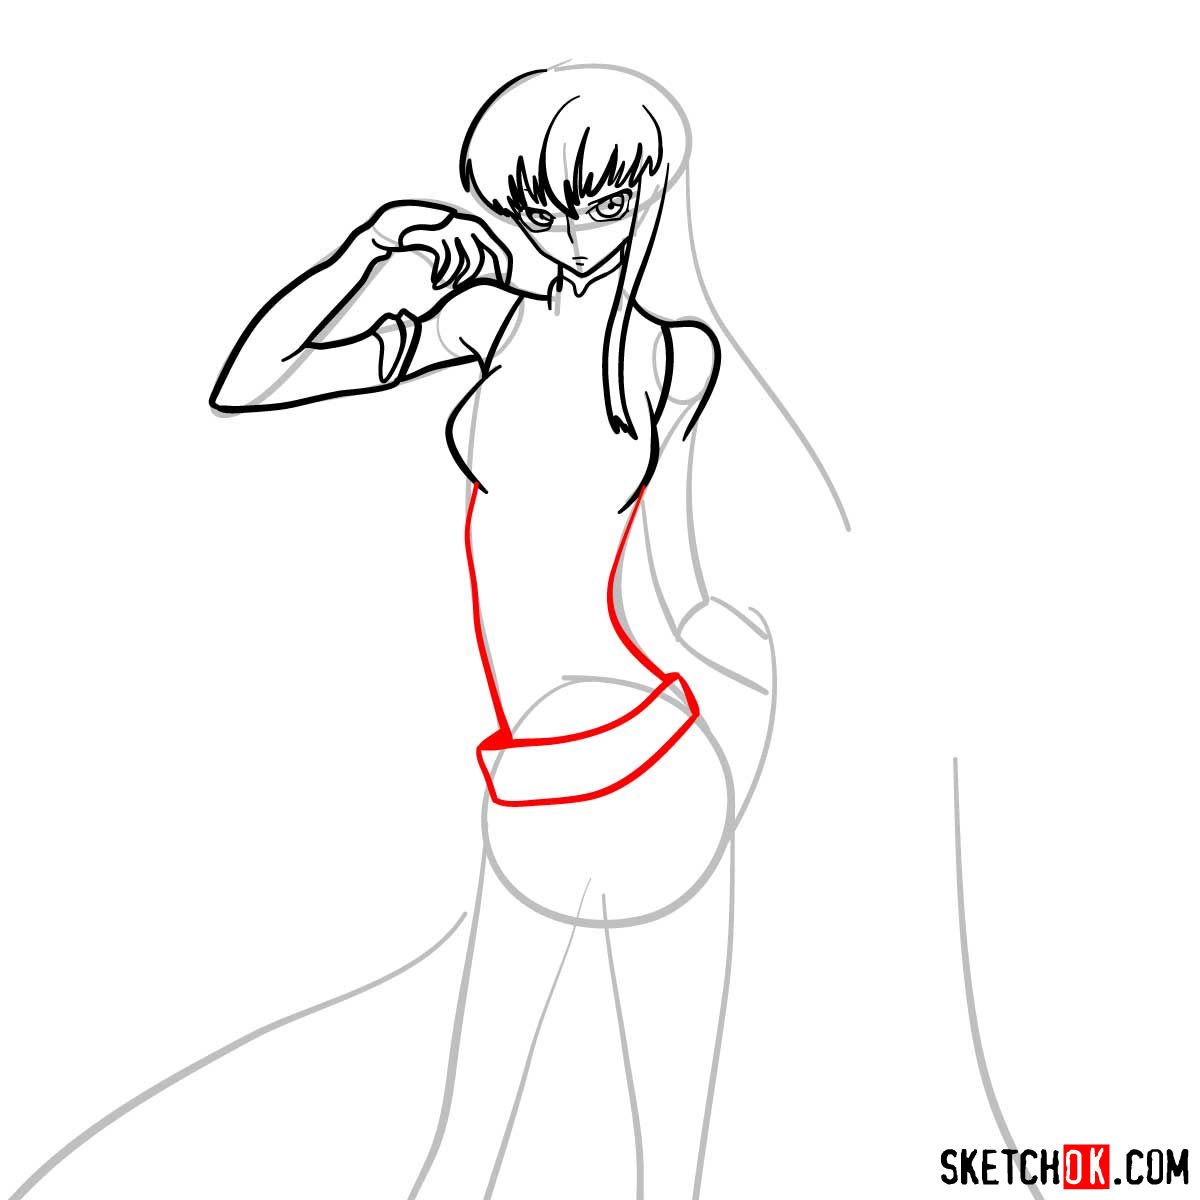 16 steps drawing guide of C.C. from Code Geass anime - step 09